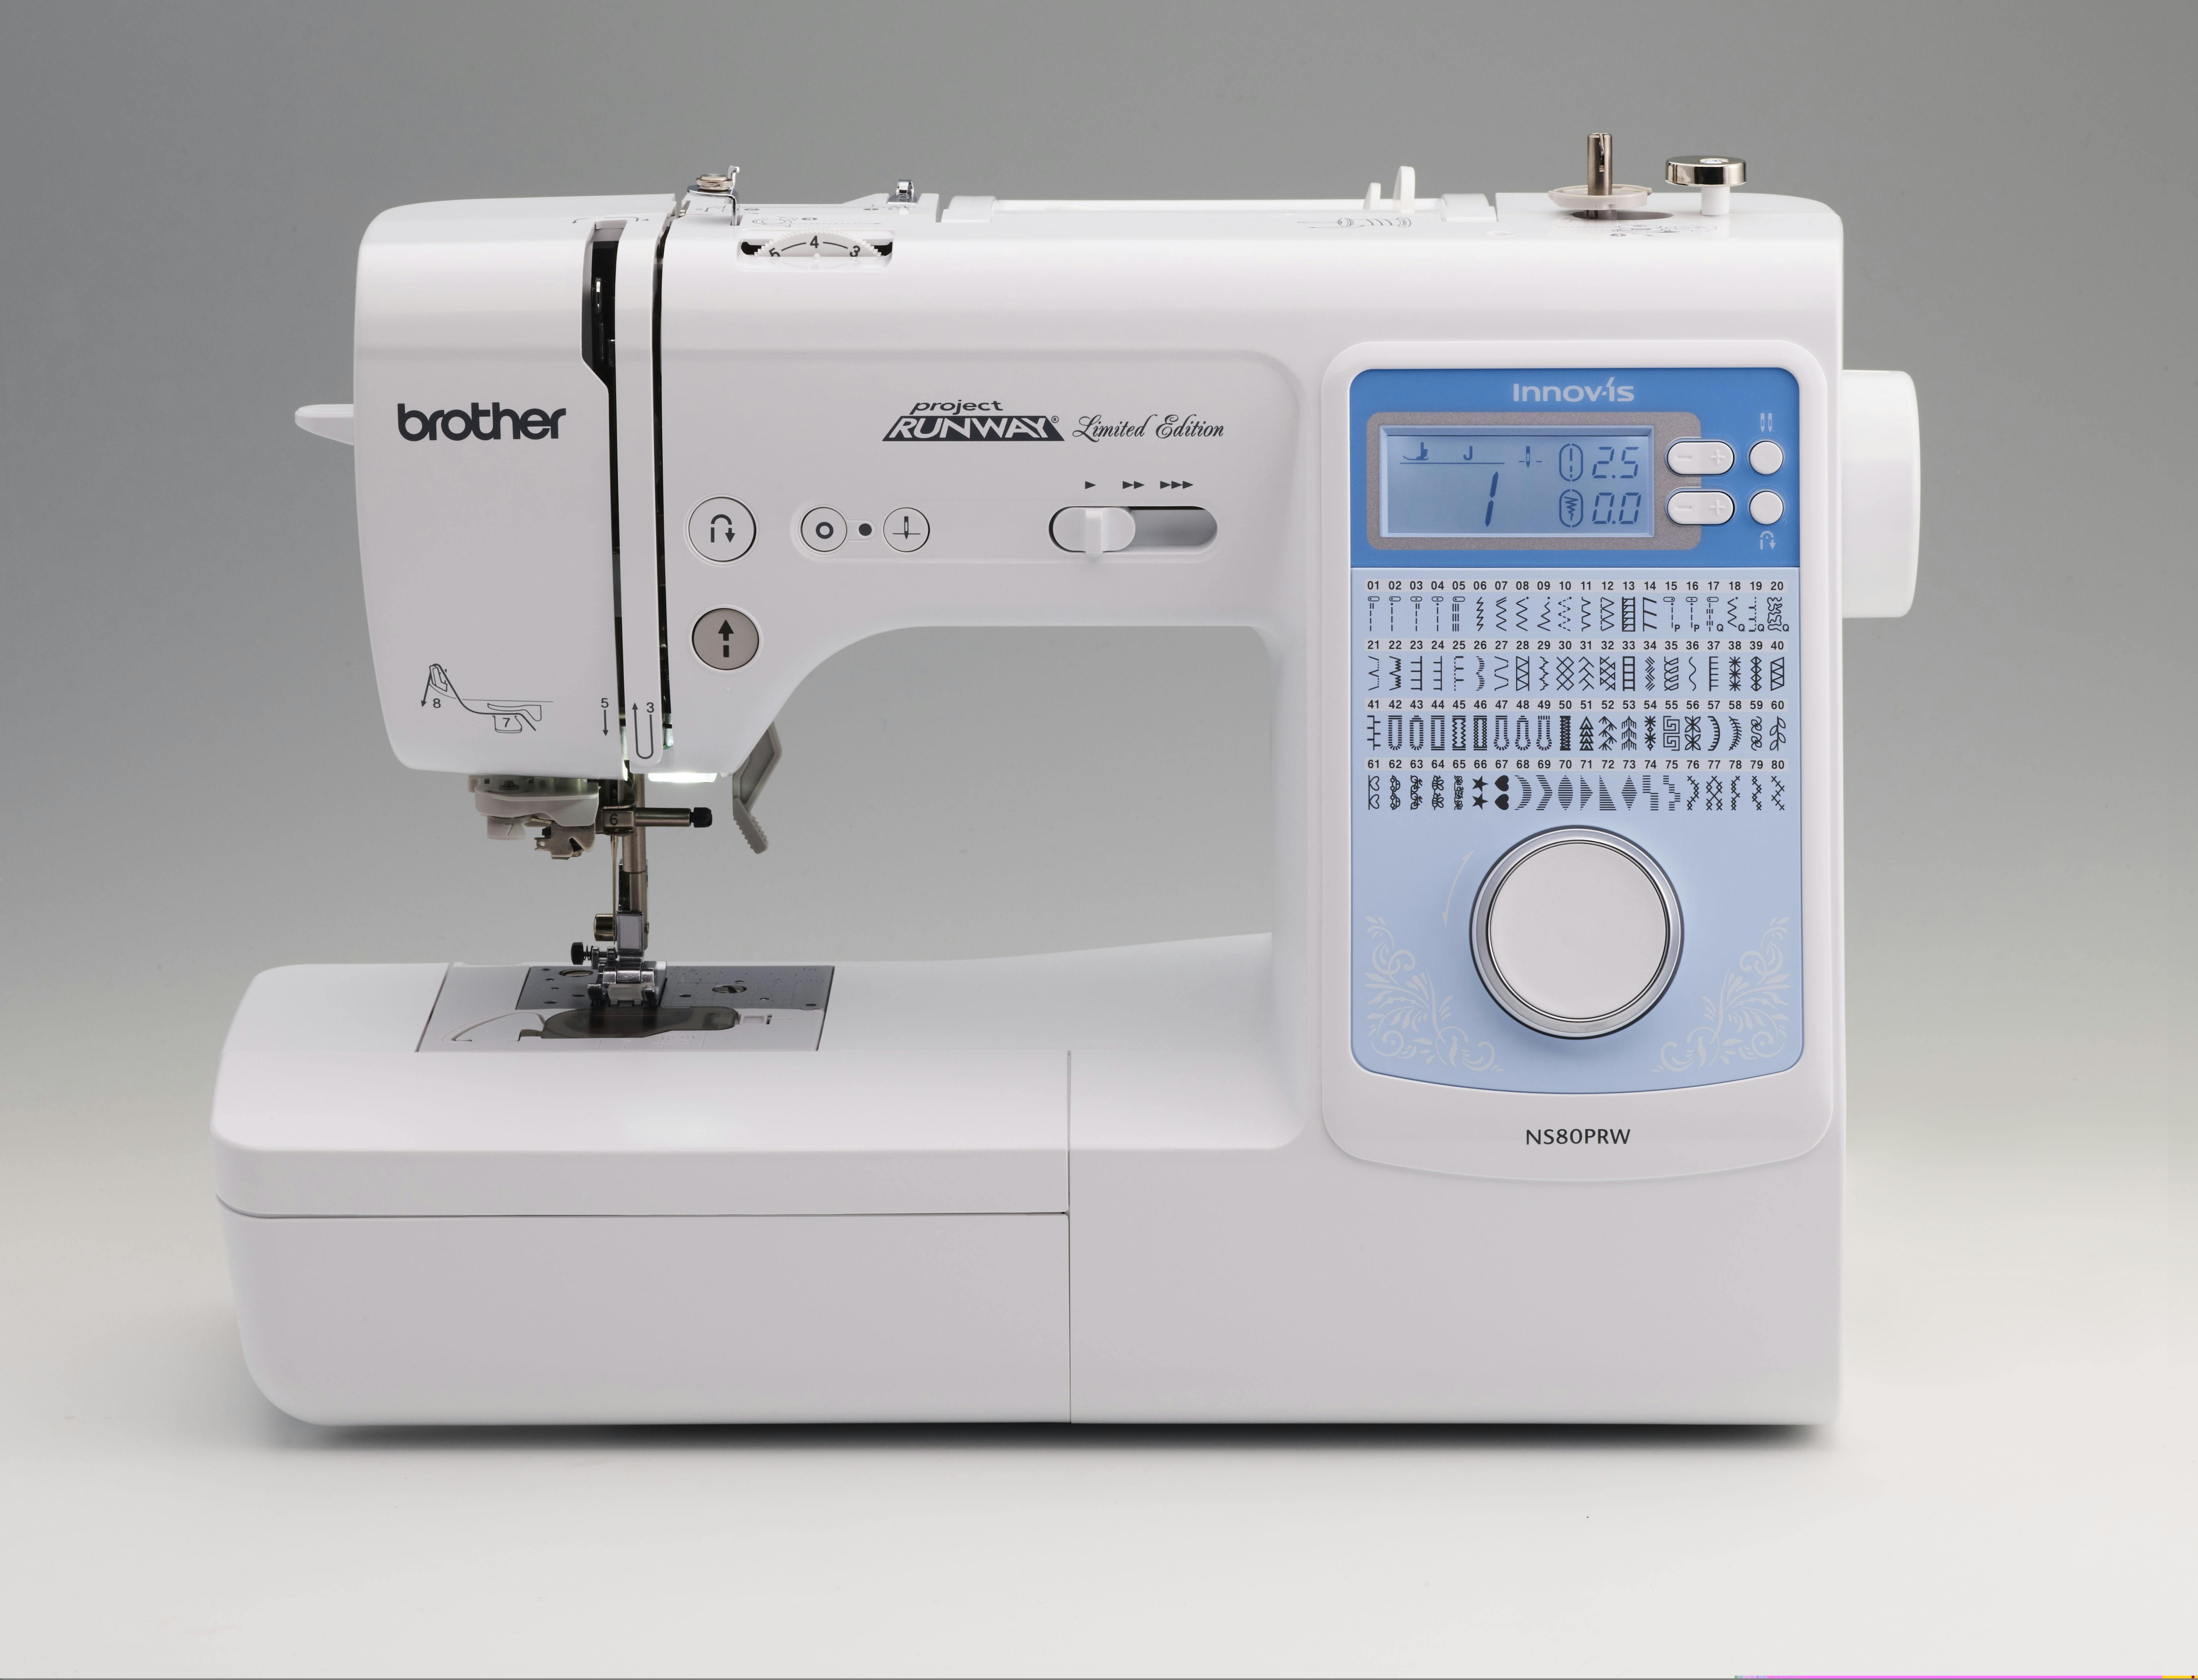 brother project runway sewing machine manual